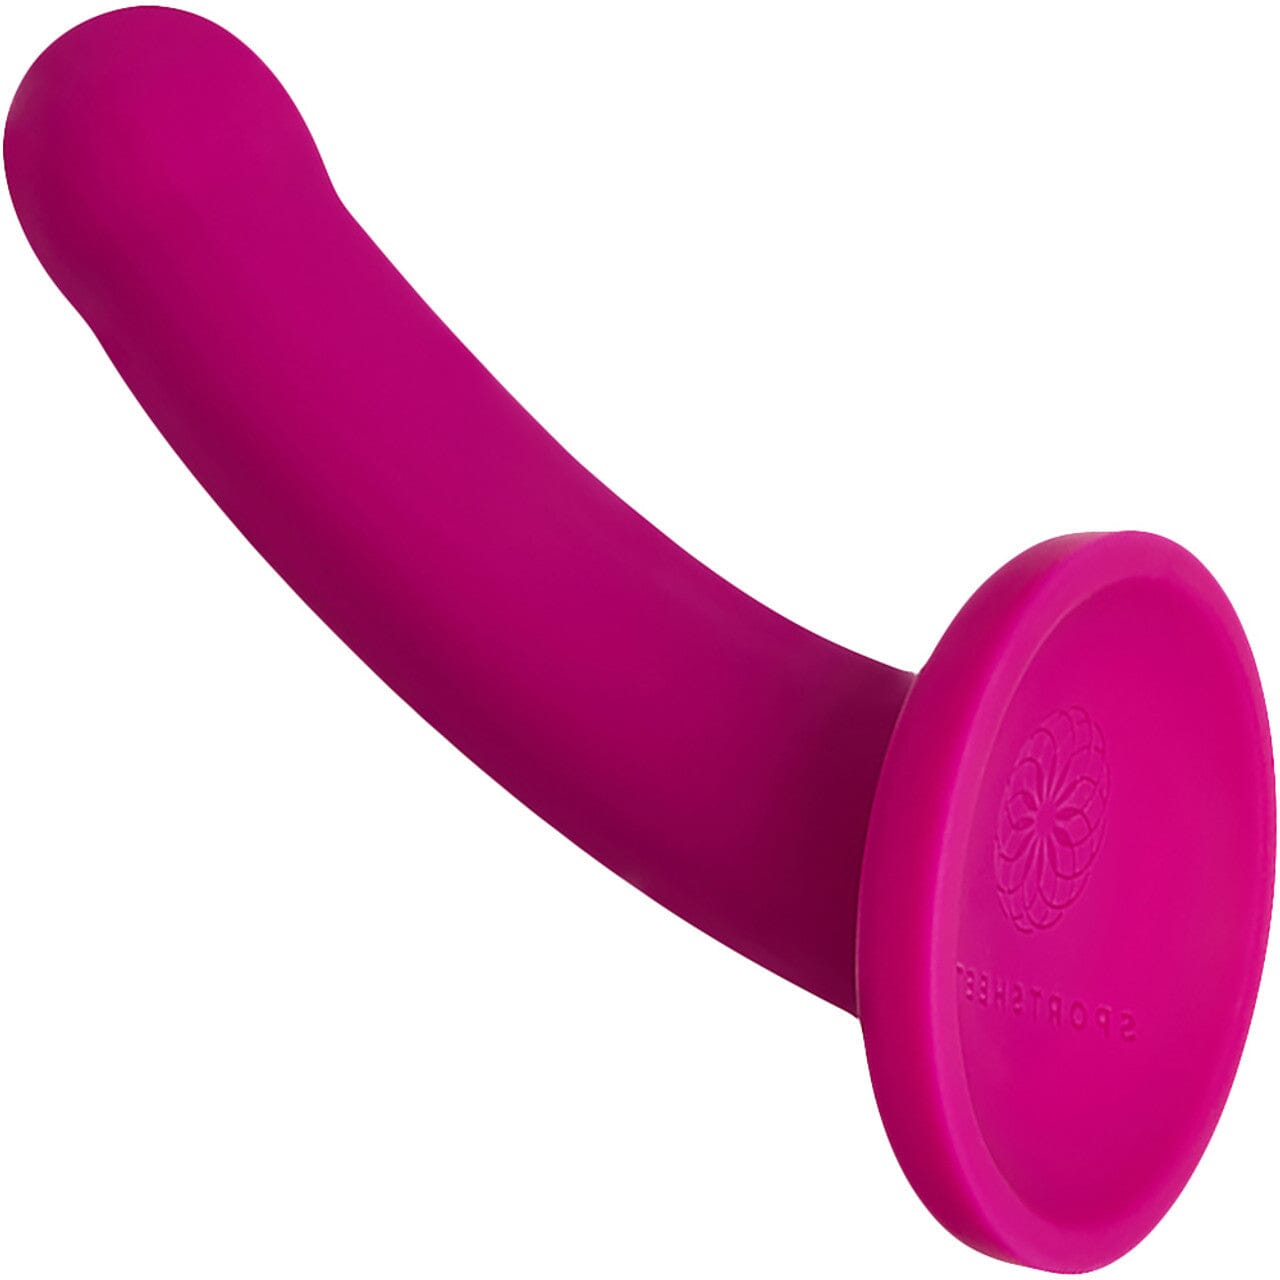 Sportsheets Merge Collection Galaxie 7" Solid Silicone Dildo Scandals 